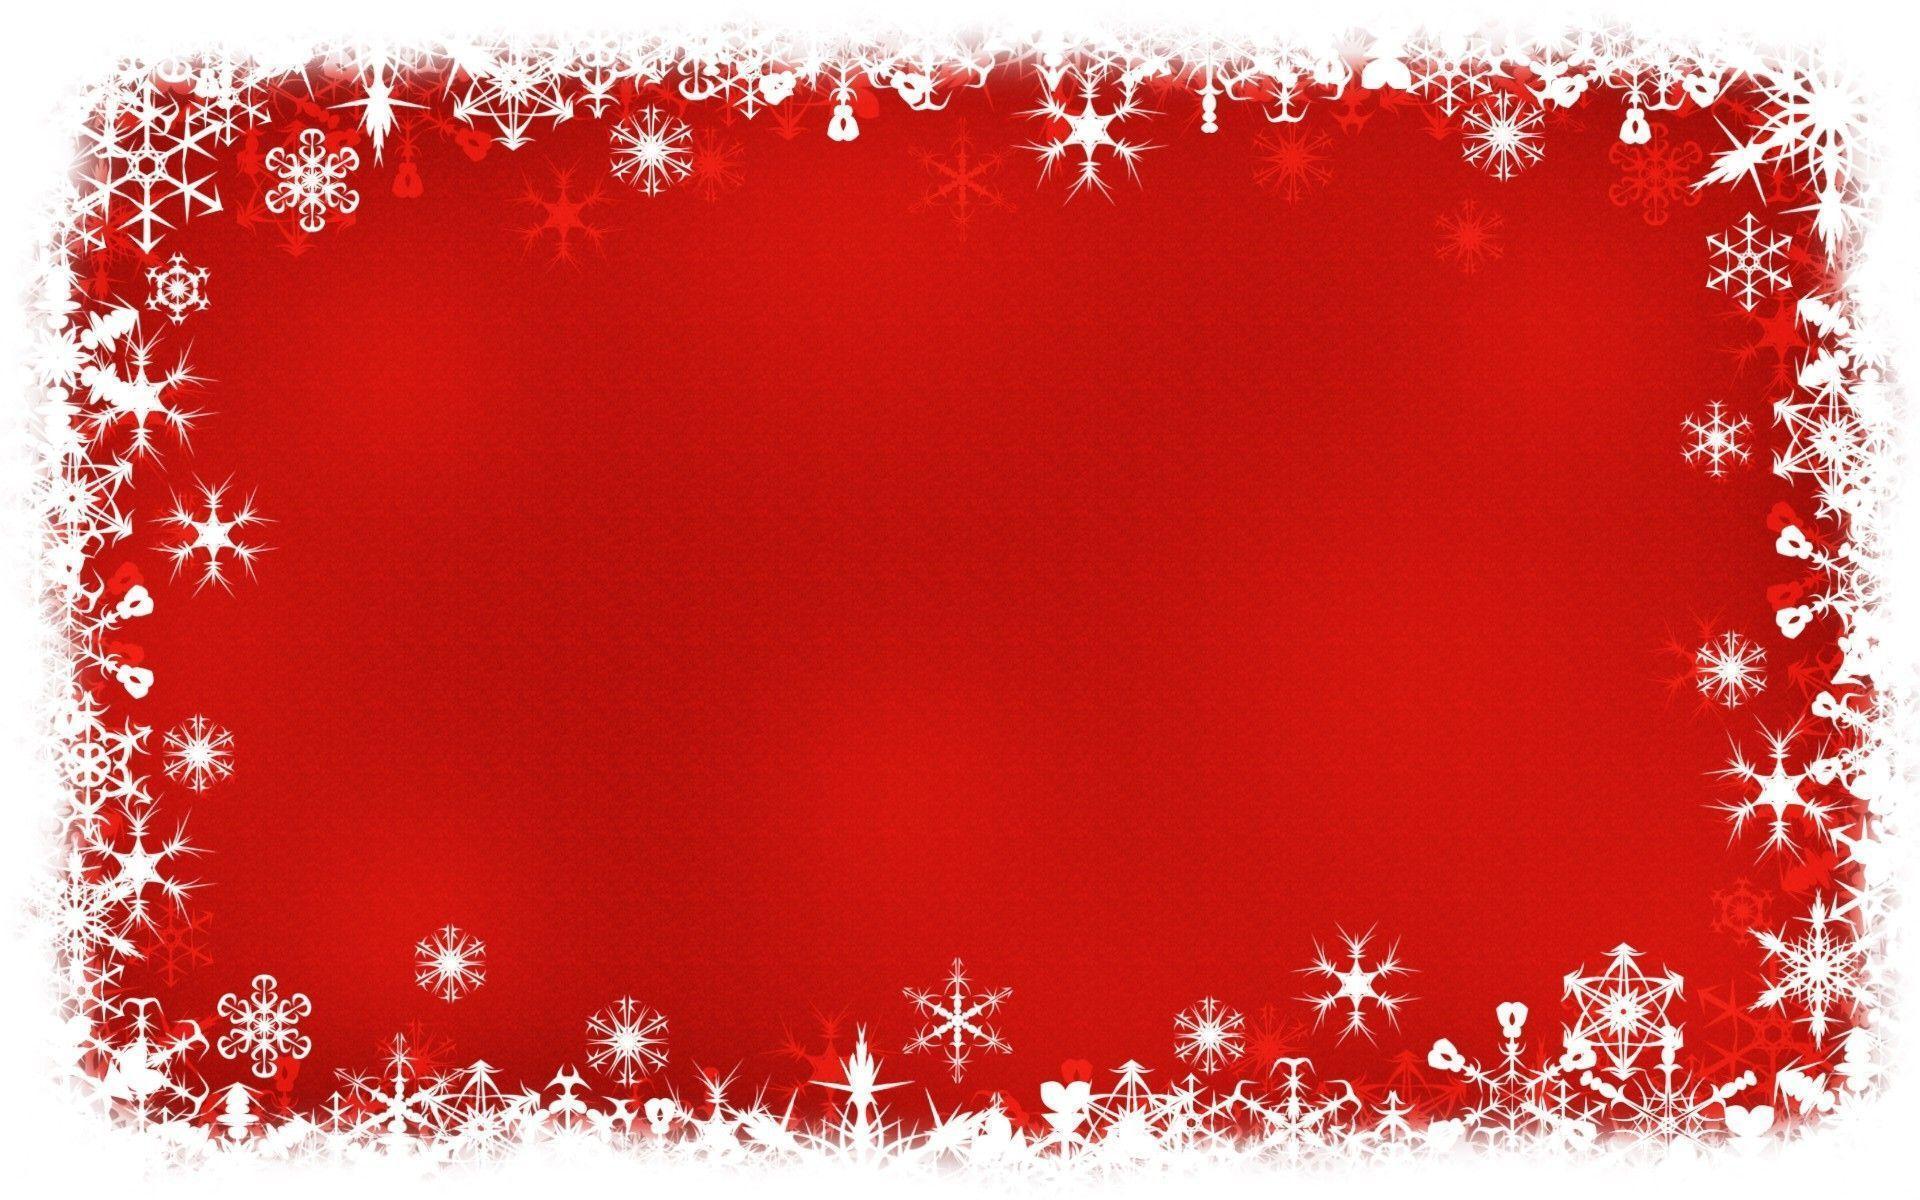 1920 x 1200 · jpeg - Red Christmas Backgrounds - Wallpaper Cave